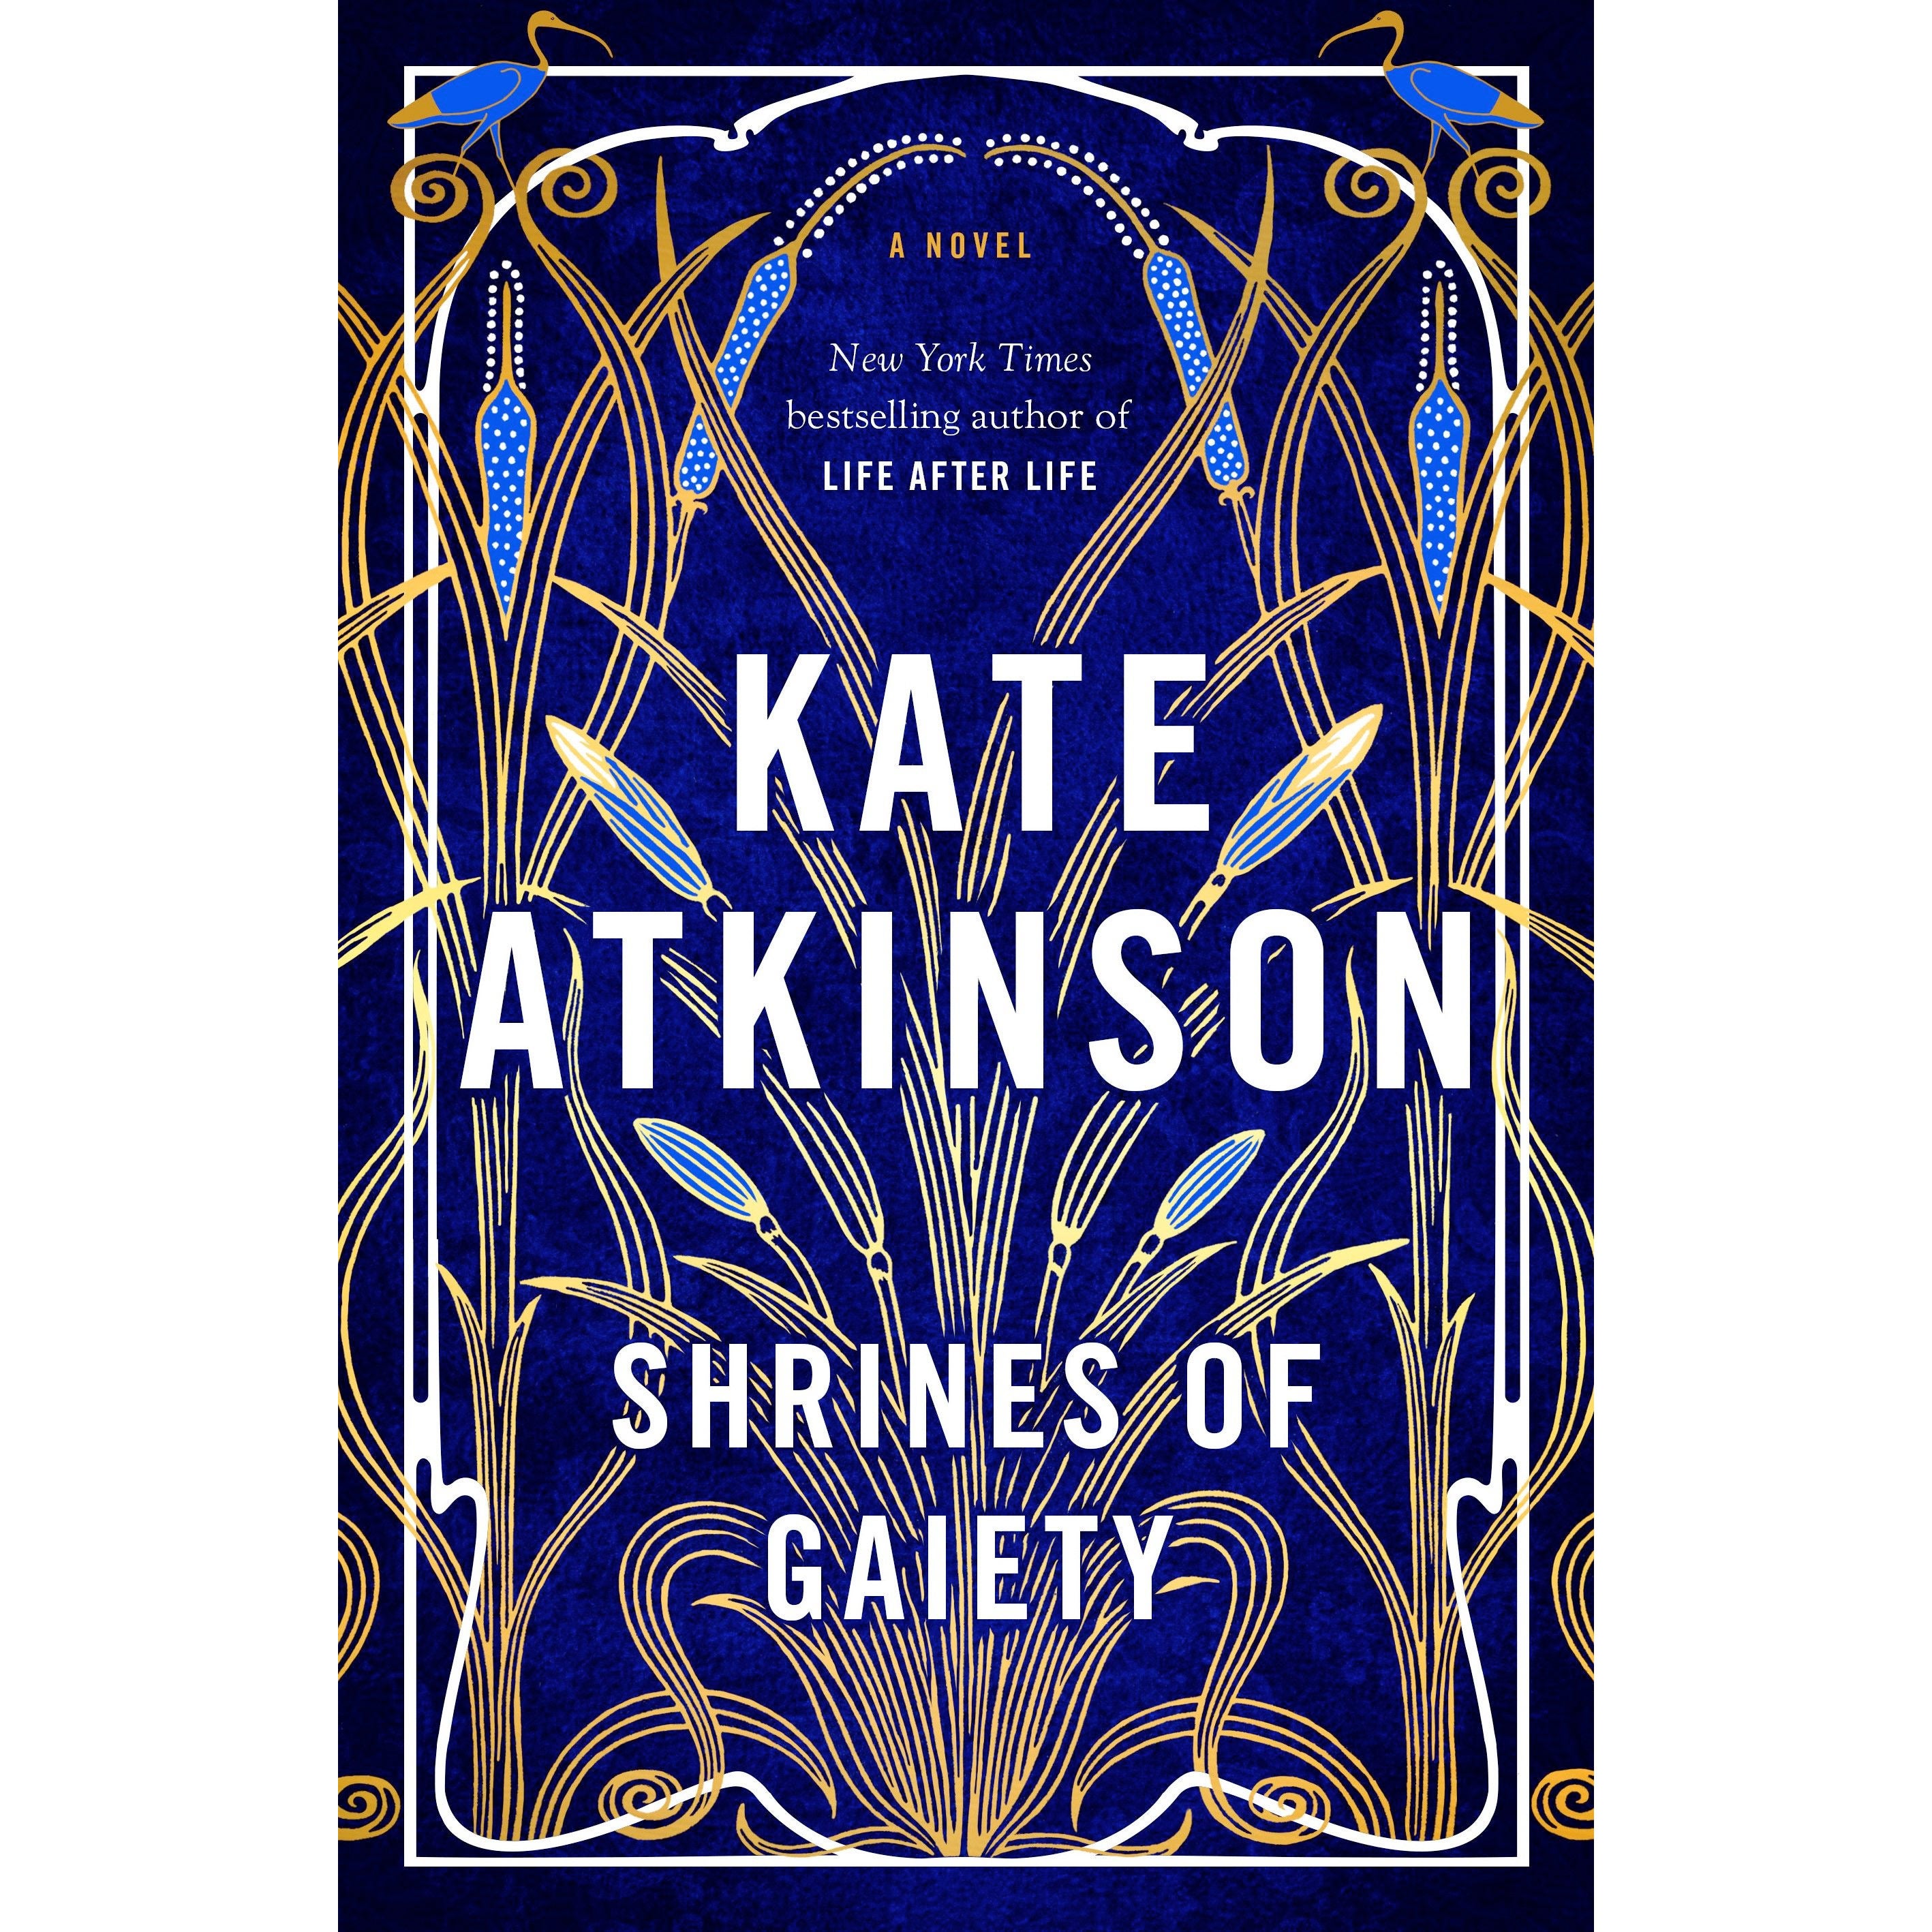 The art deco-style cover of Shrines of Gaiety.